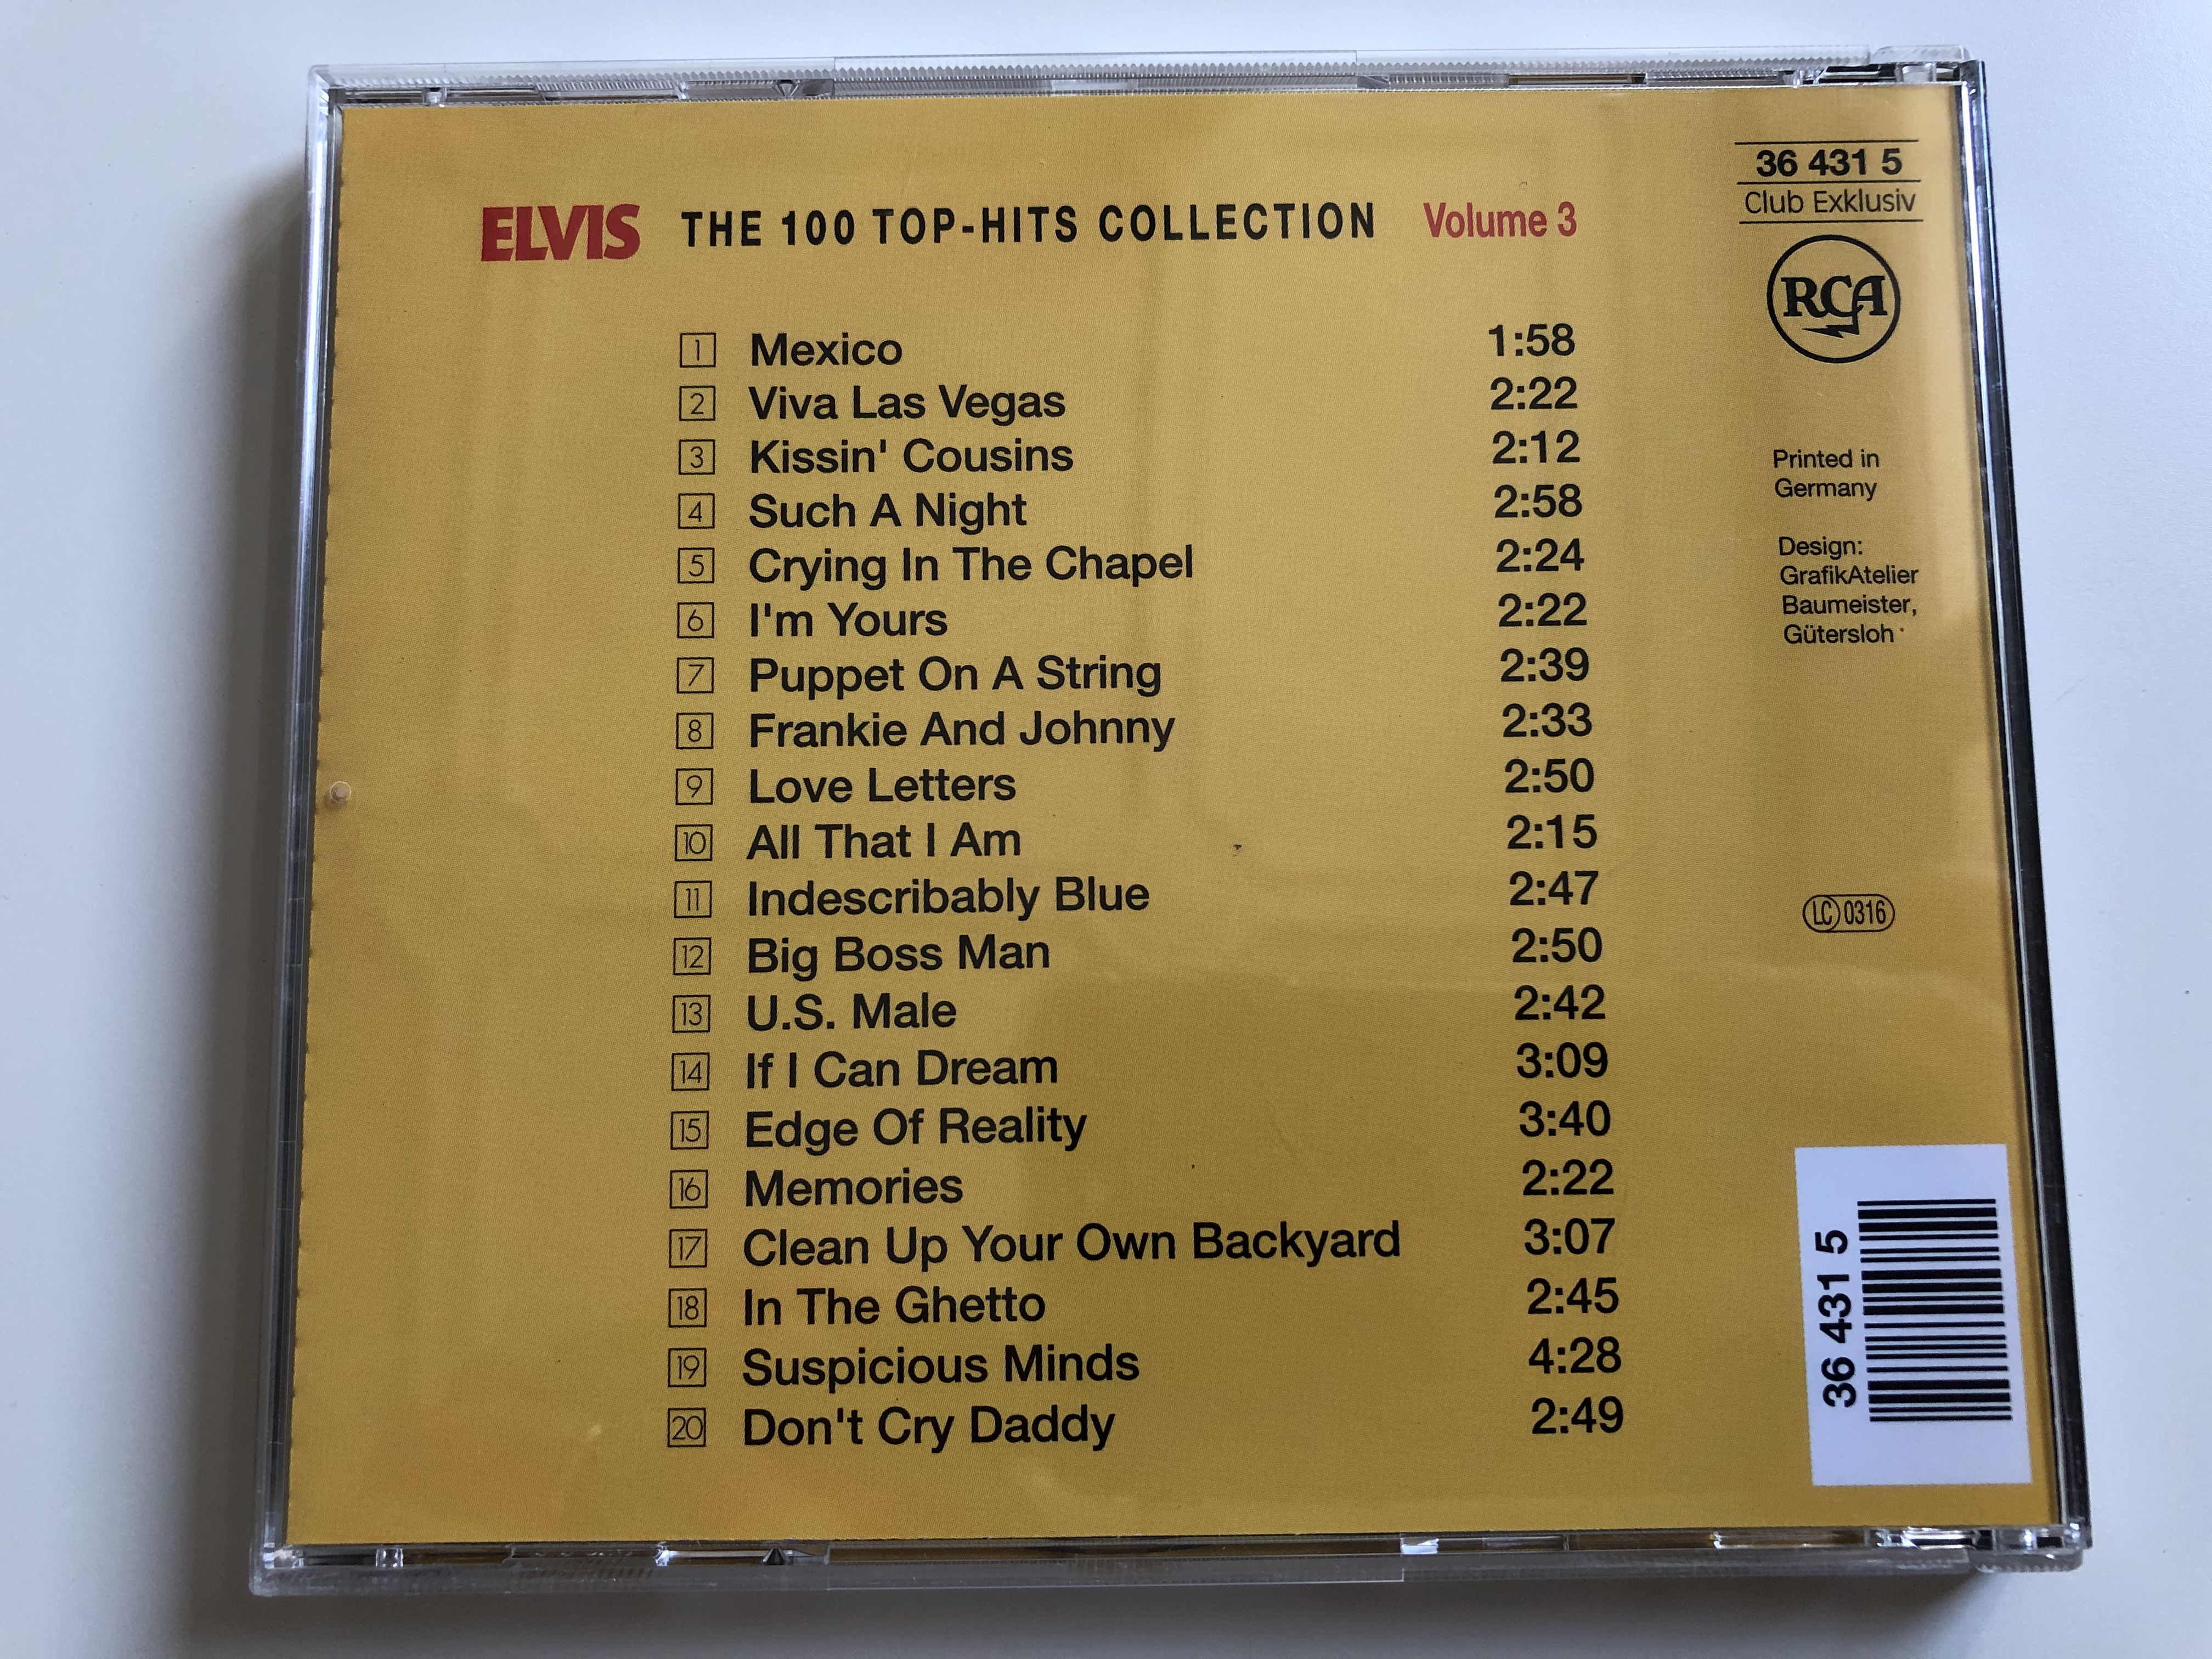 elvis-the-100-top-hits-collection-rca-5x-audio-cd-box-set-1997-stereo-36-428-1-16-.jpg